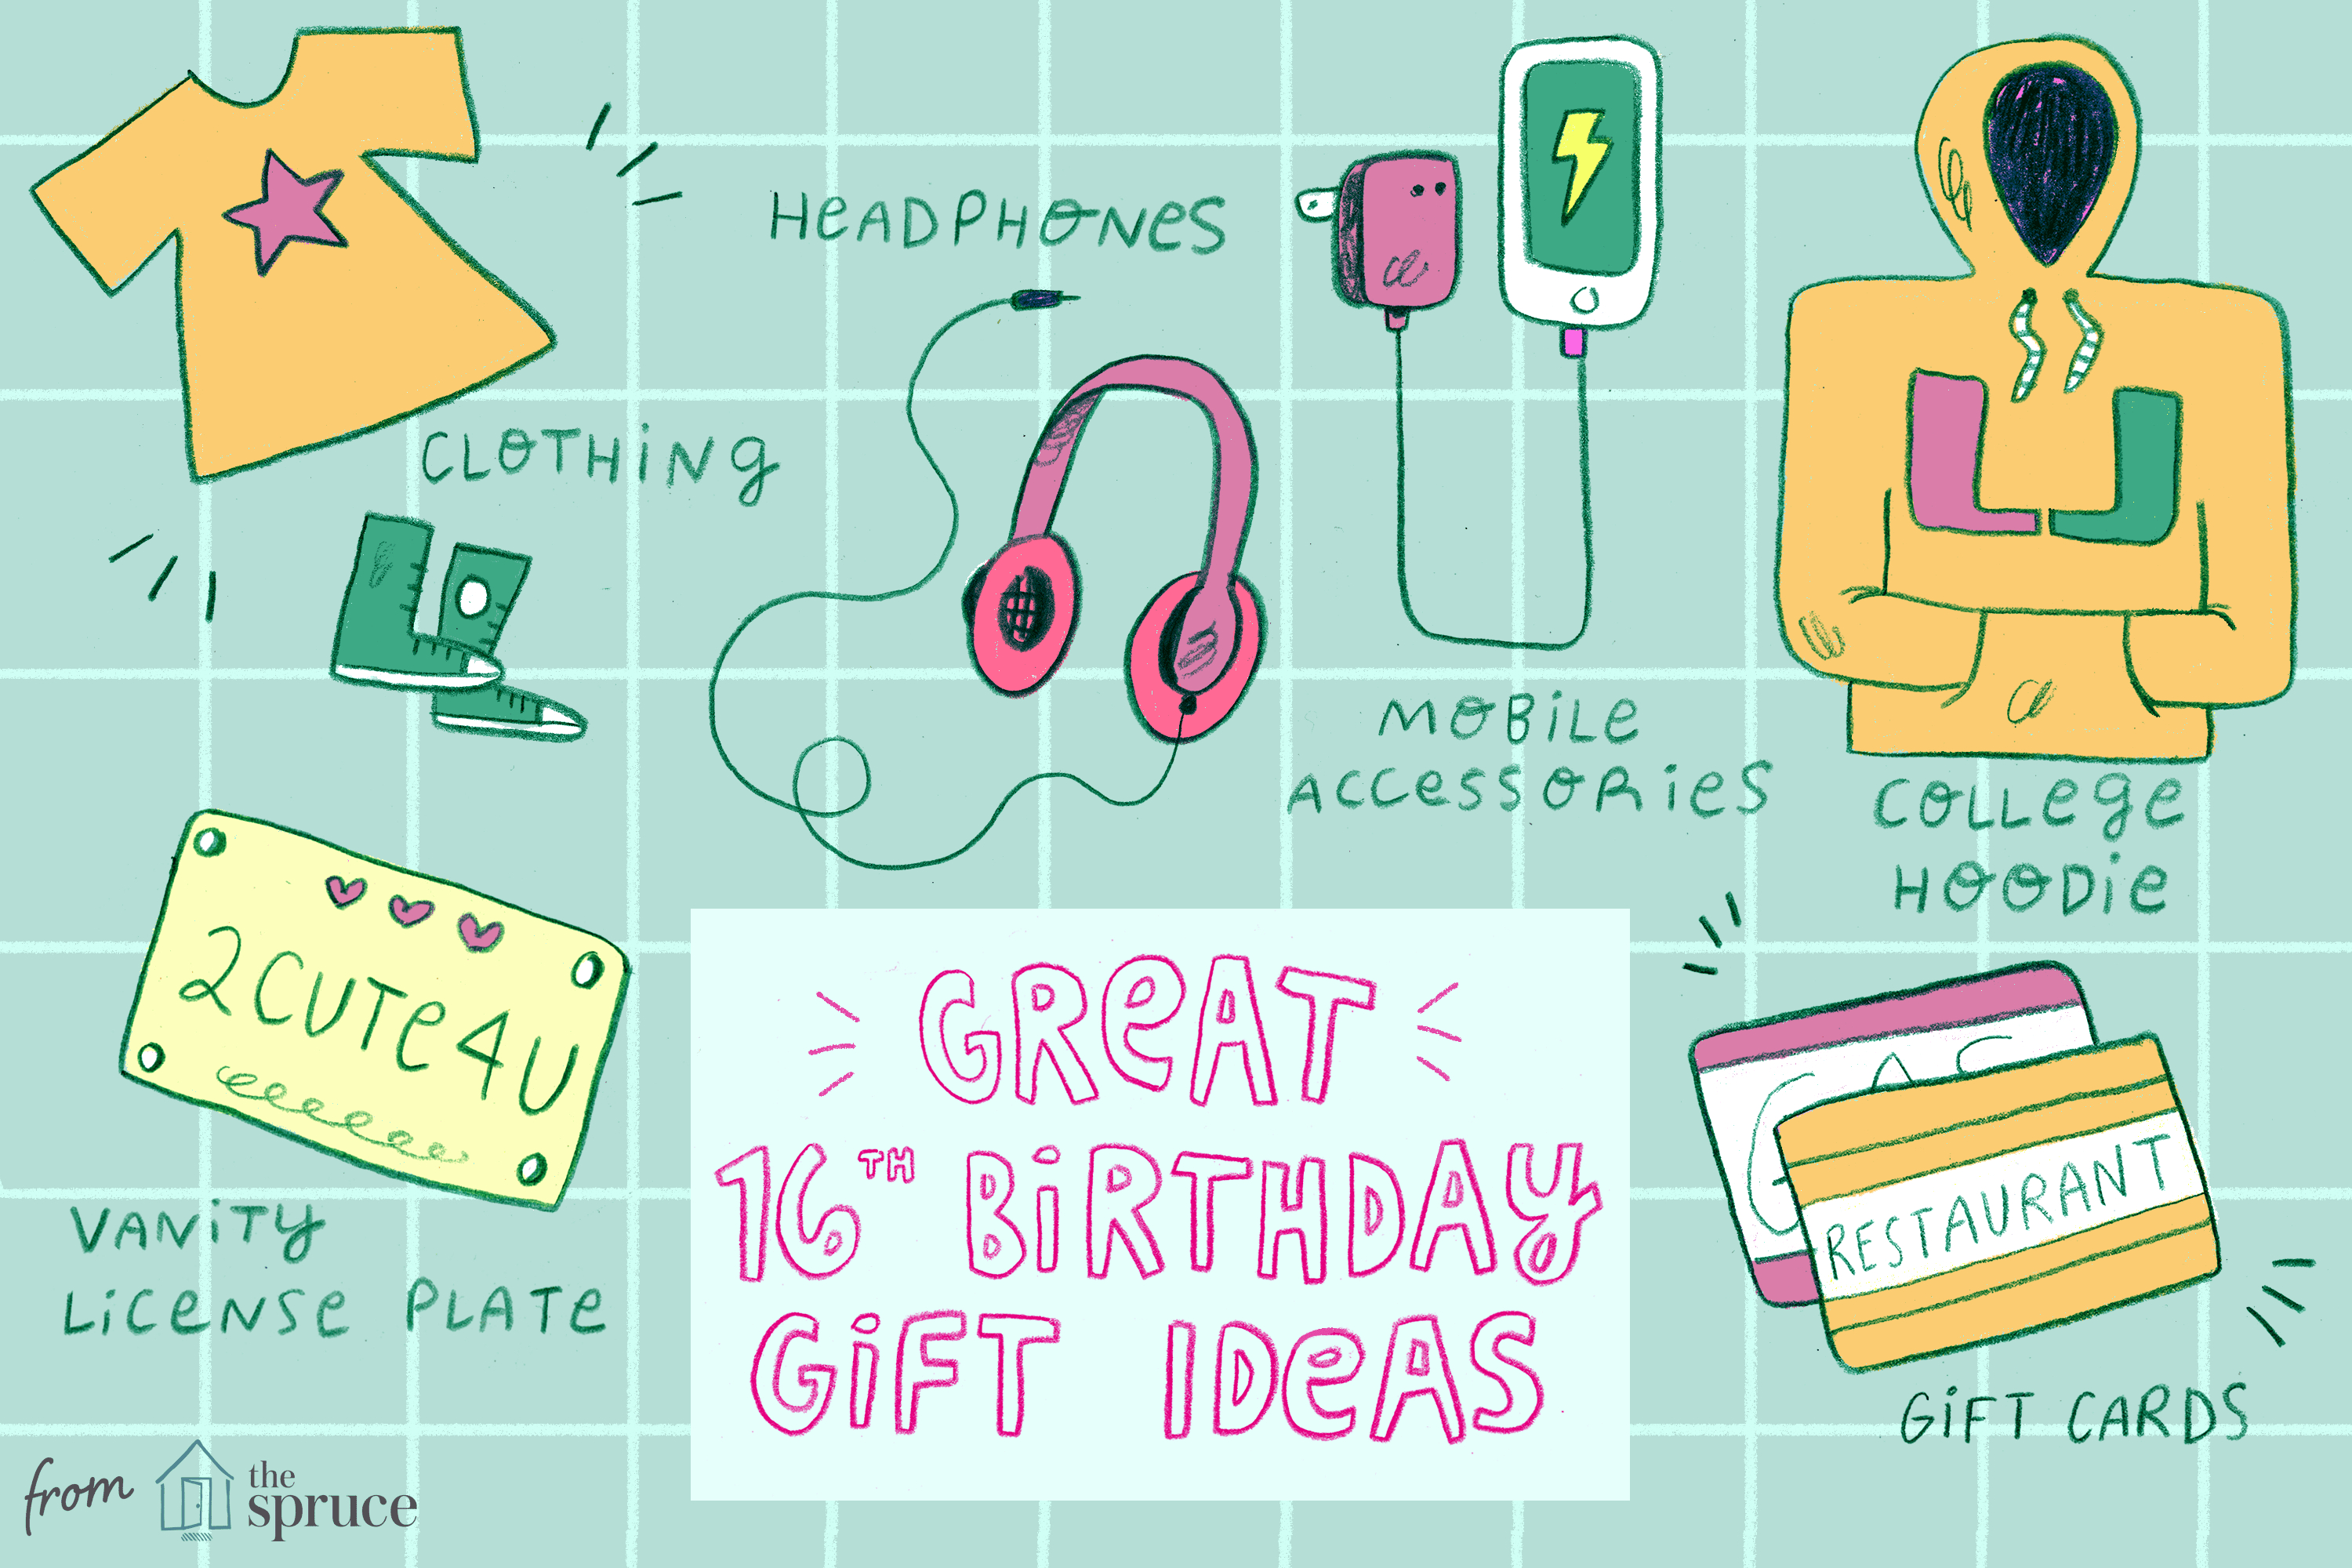 Cute Birthday Card Ideas For Girlfriend 20 Awesome Ideas For 16th Birthday Gifts